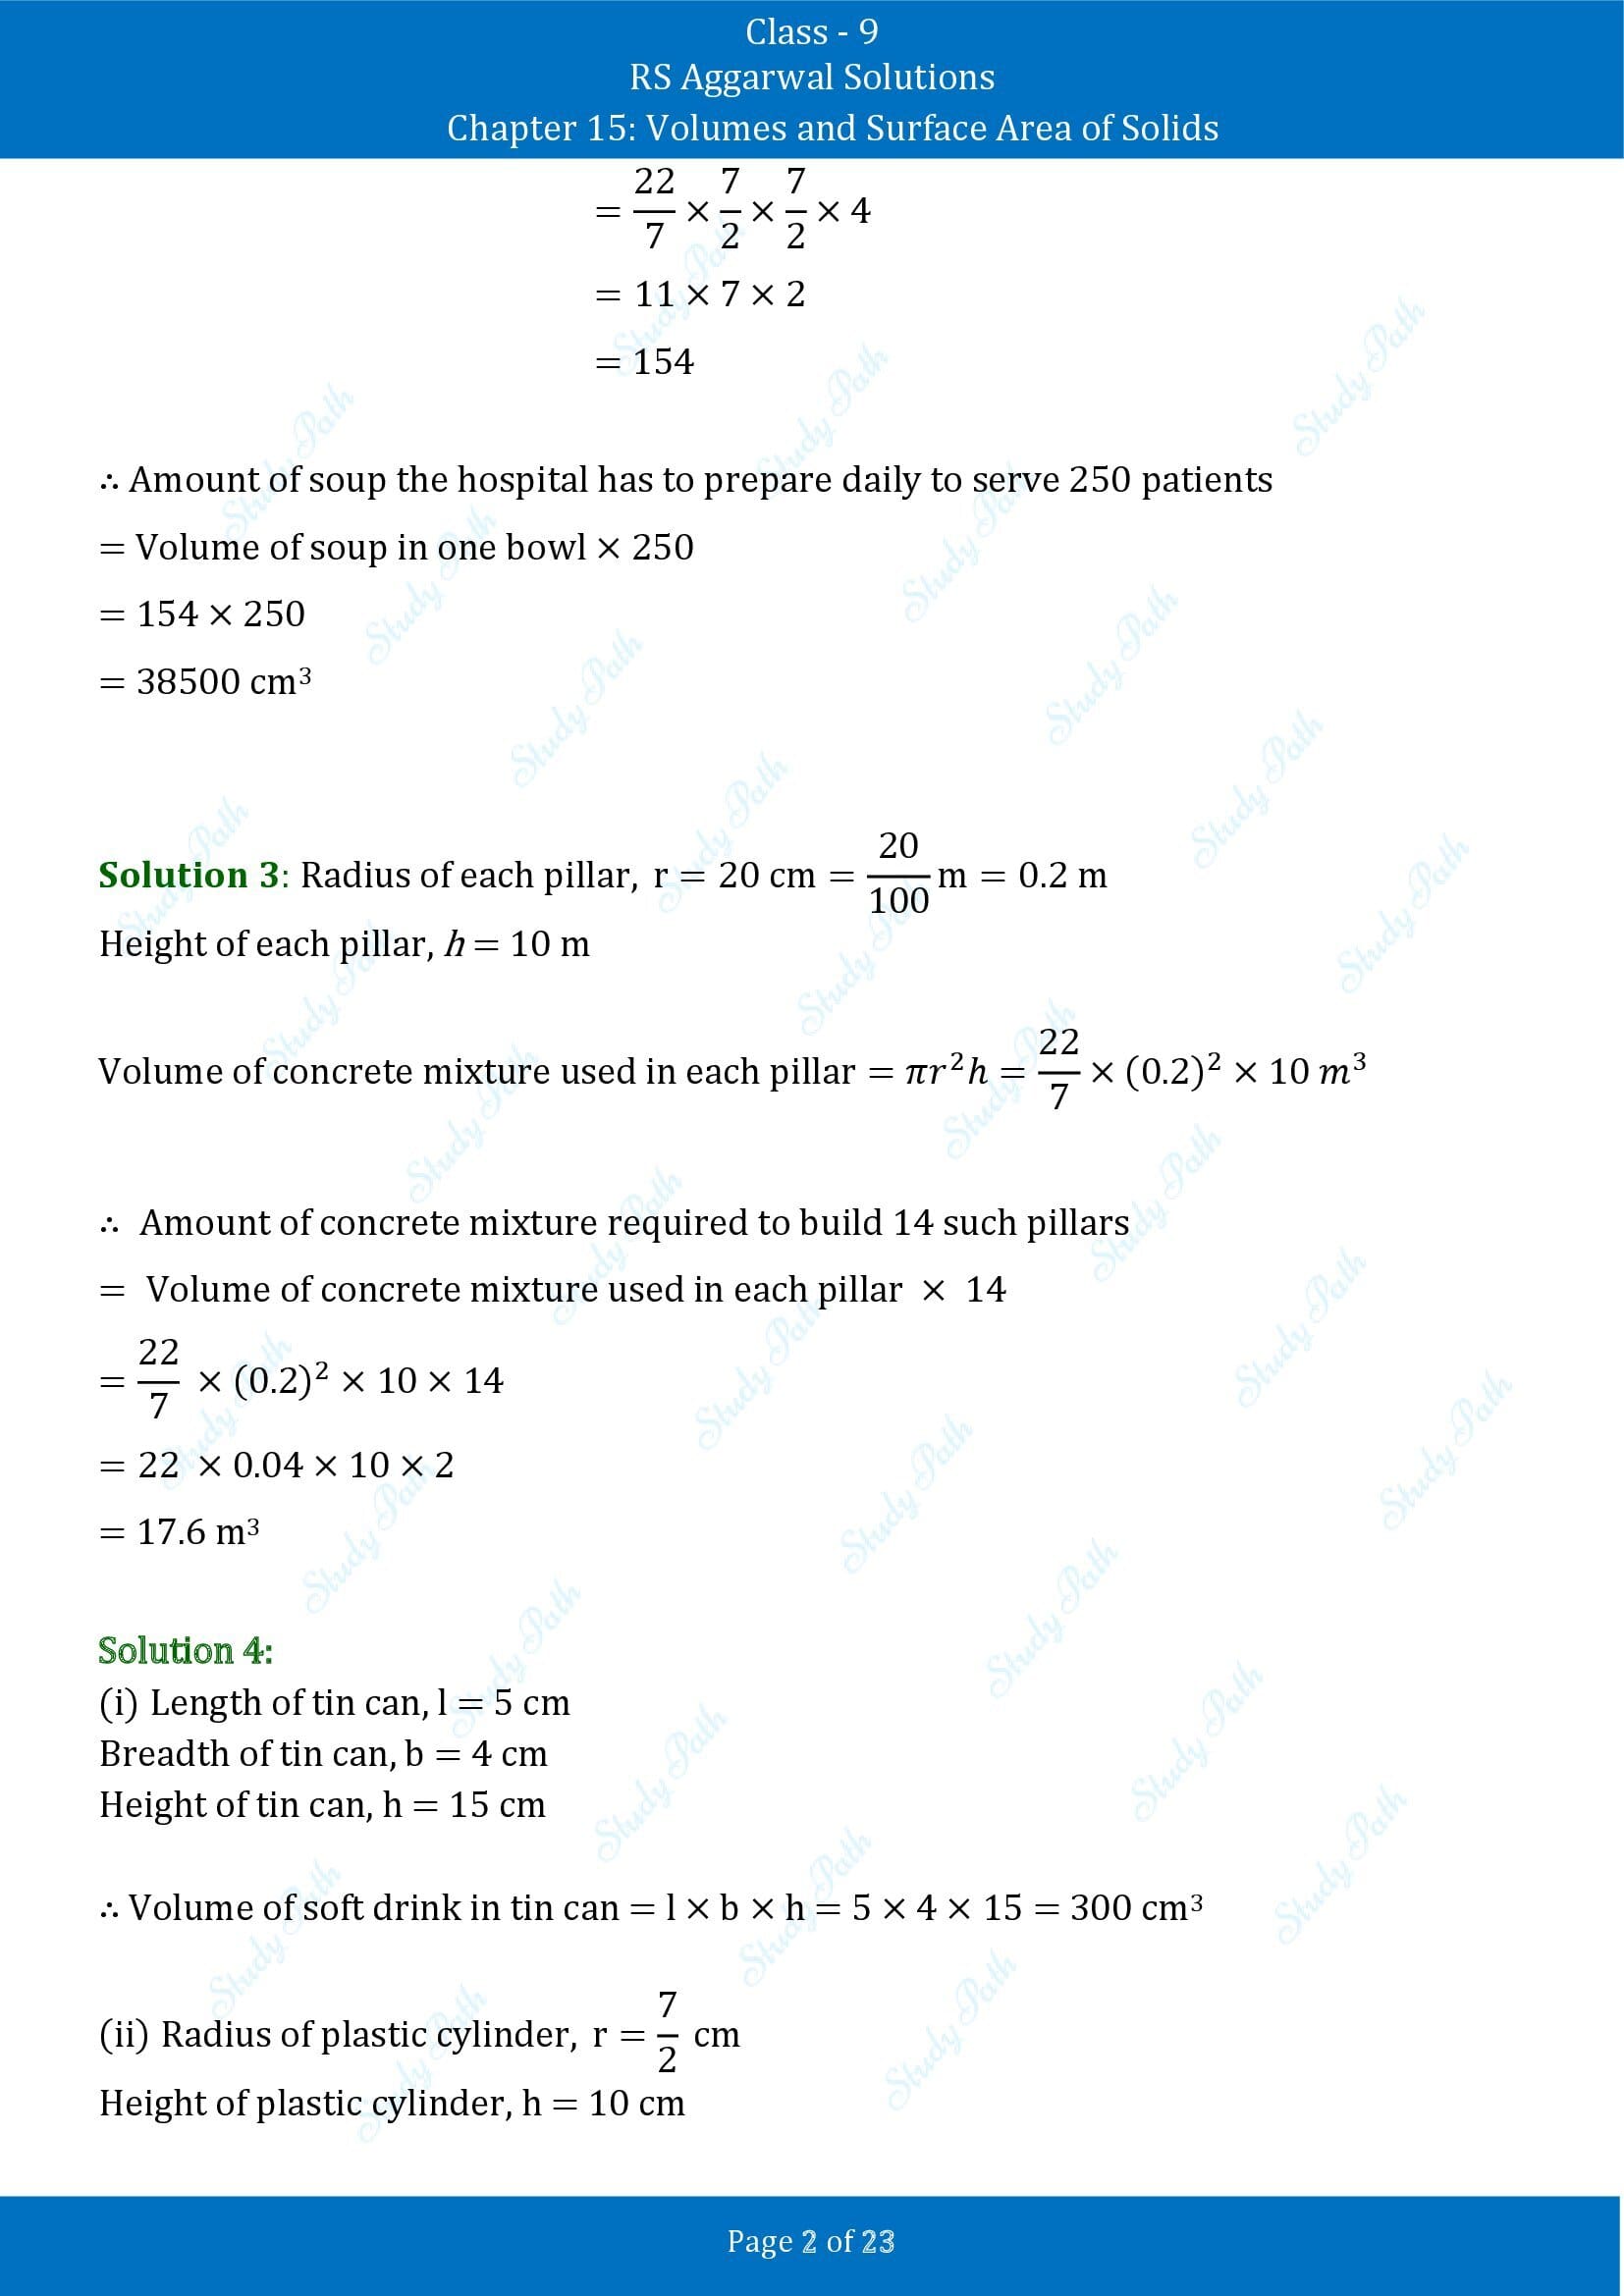 RS Aggarwal Solutions Class 9 Chapter 15 Volumes and Surface Area of Solids Exercise 15B 00002